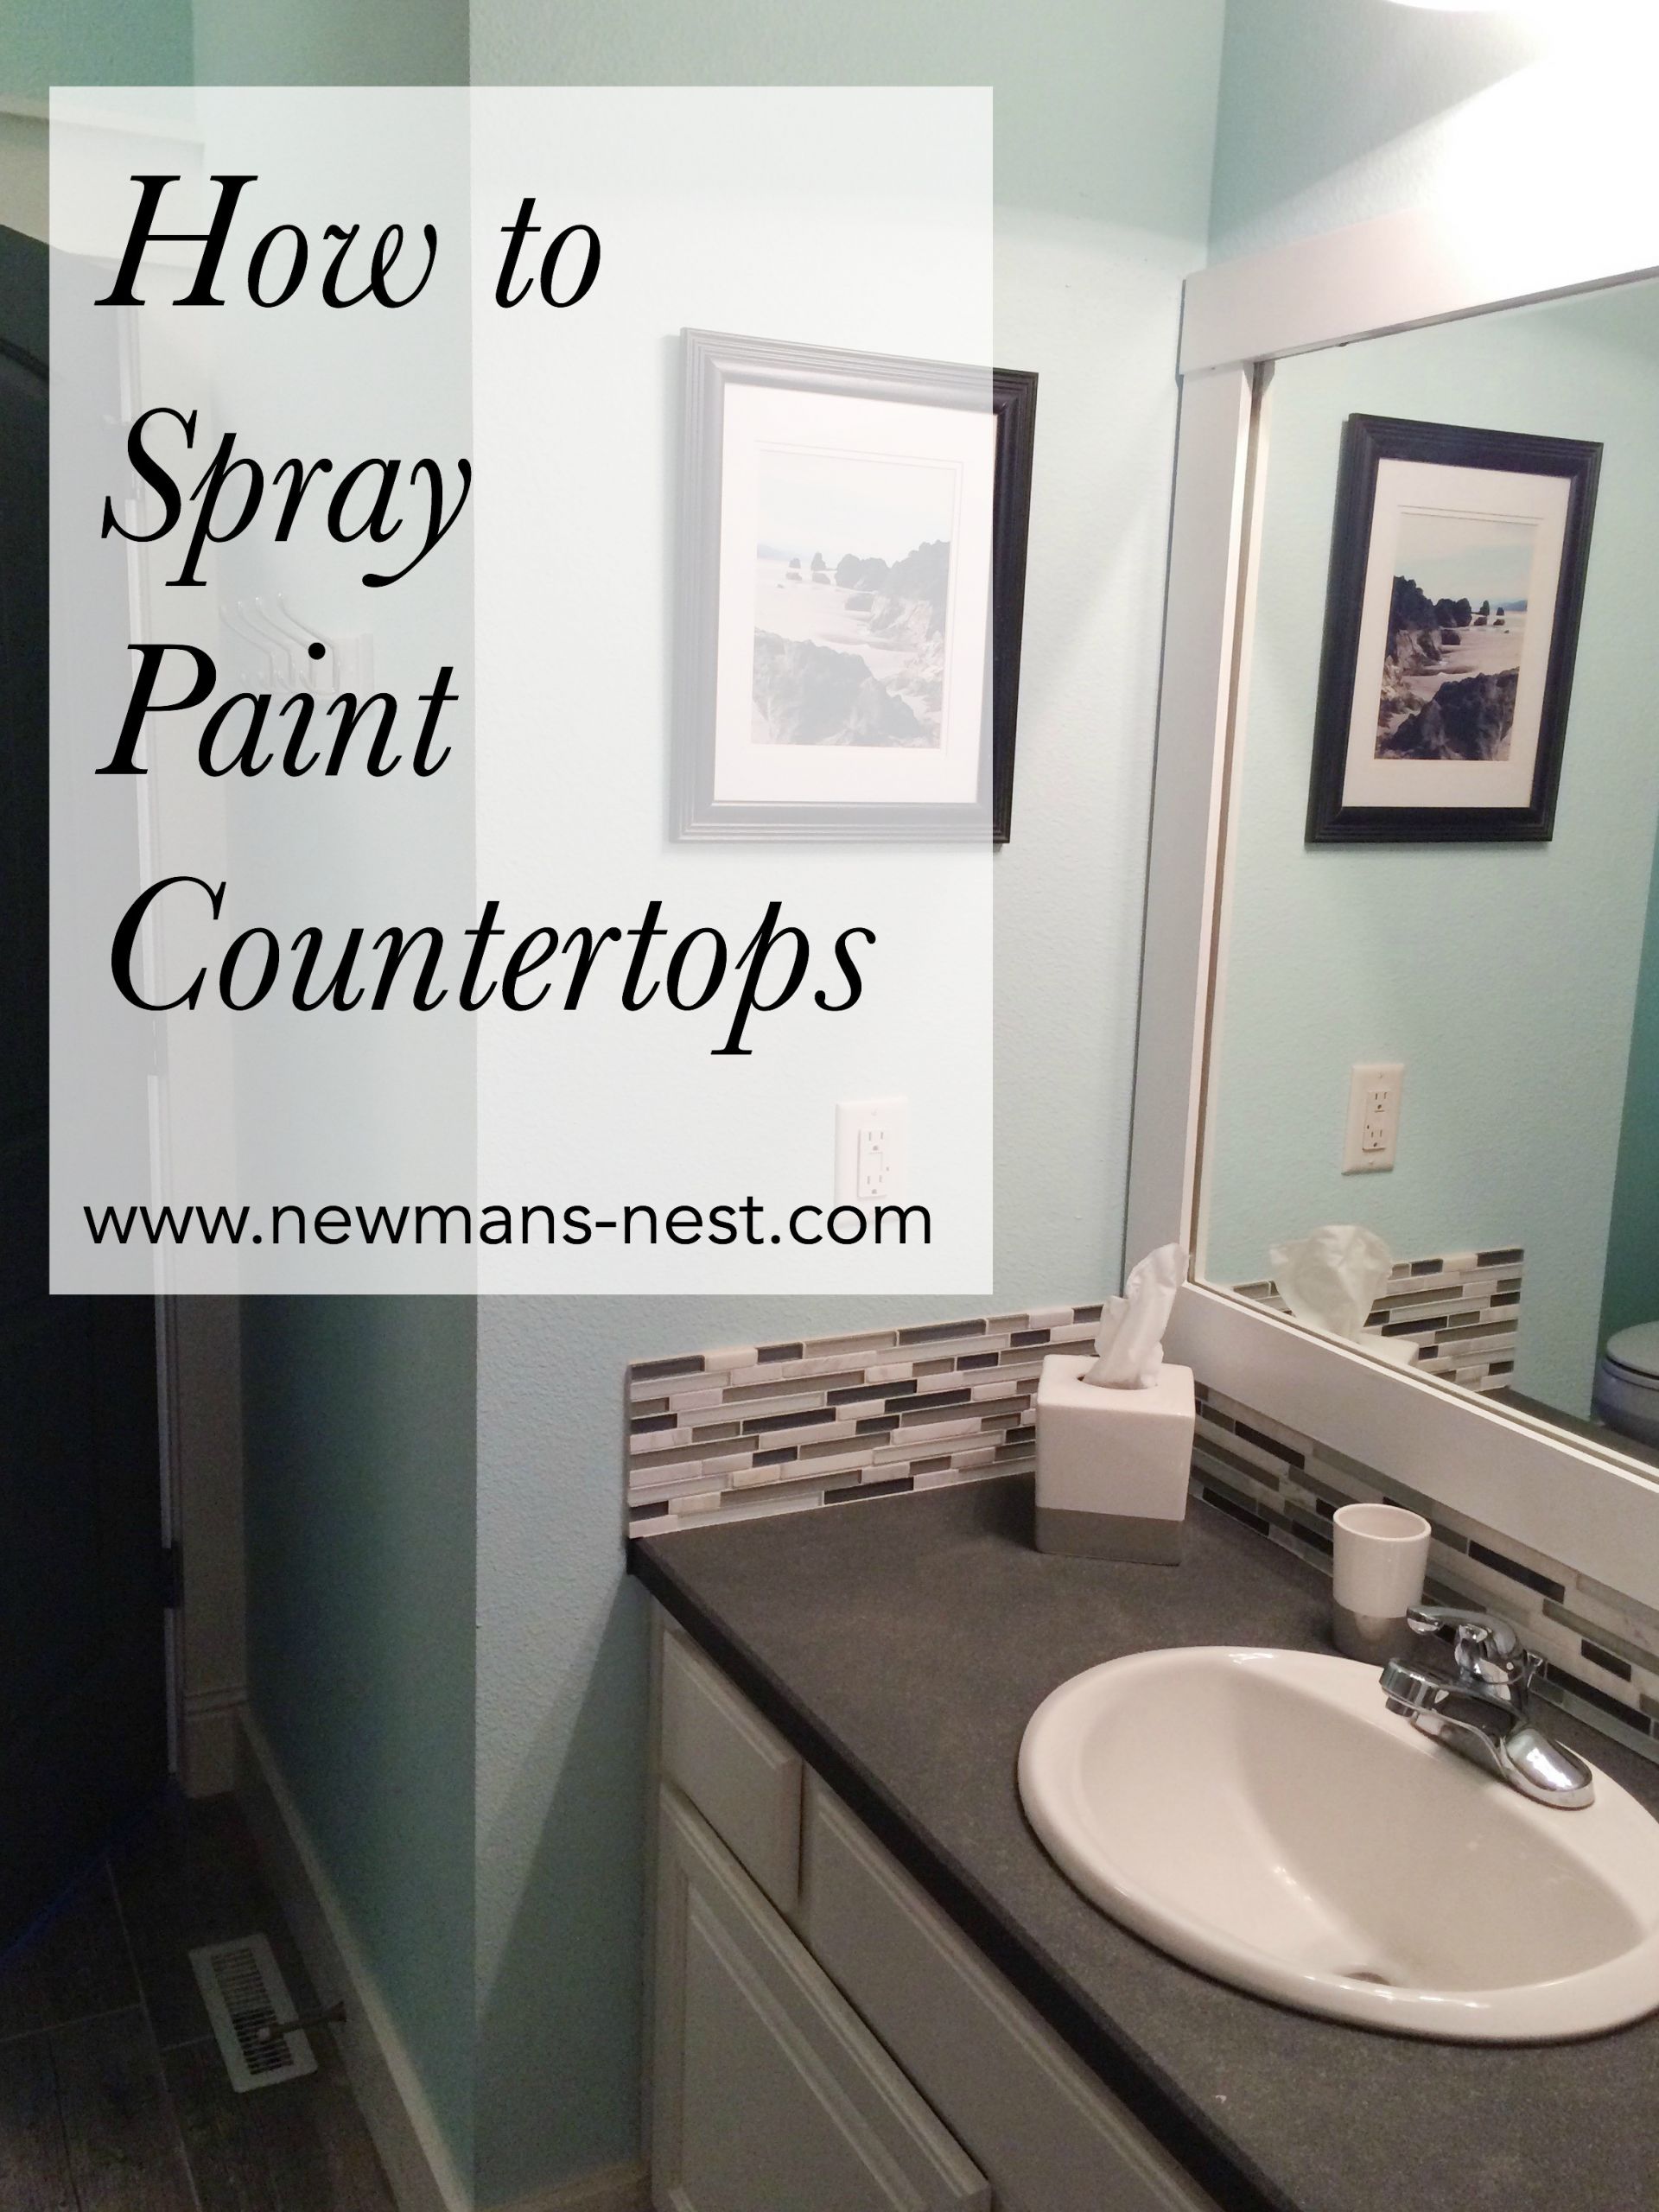 Painted Bathroom Countertop
 Spray Painted Countertops – Newman s Nest